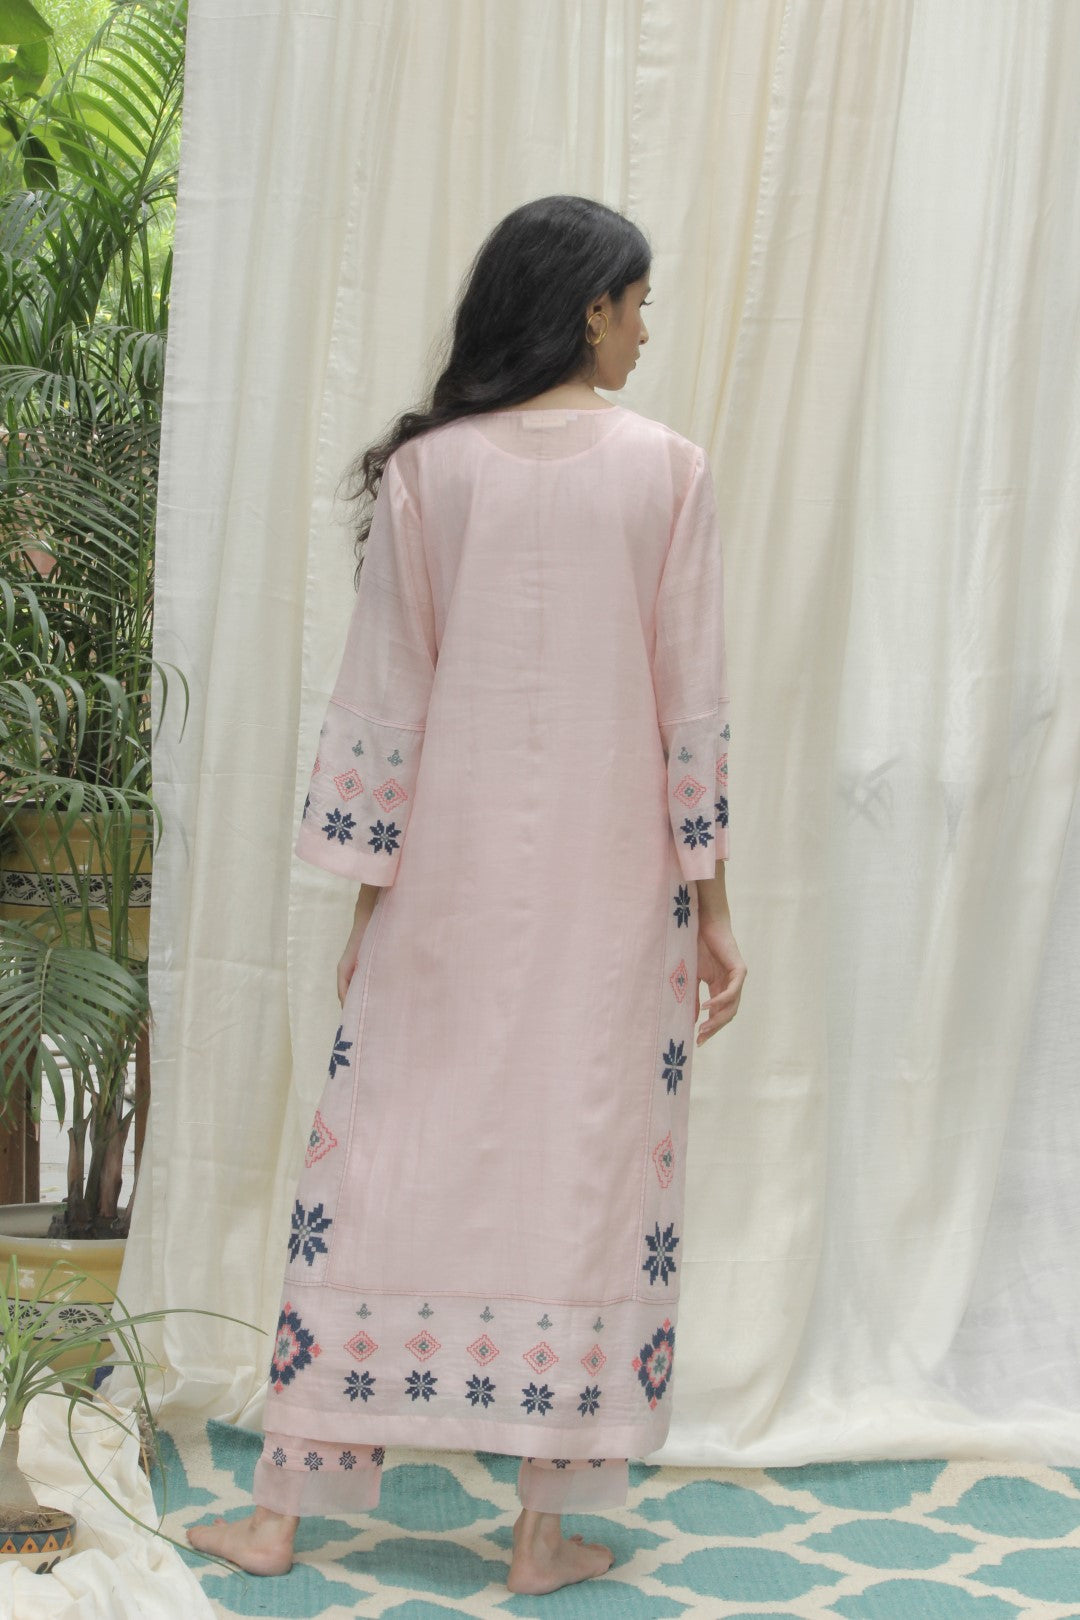 BABY PINK CHANDERI AZTEC EMBROIDERED KALI KURTA WITH EMBROIDERED DUPATTA AND PANTS. SET OF 3